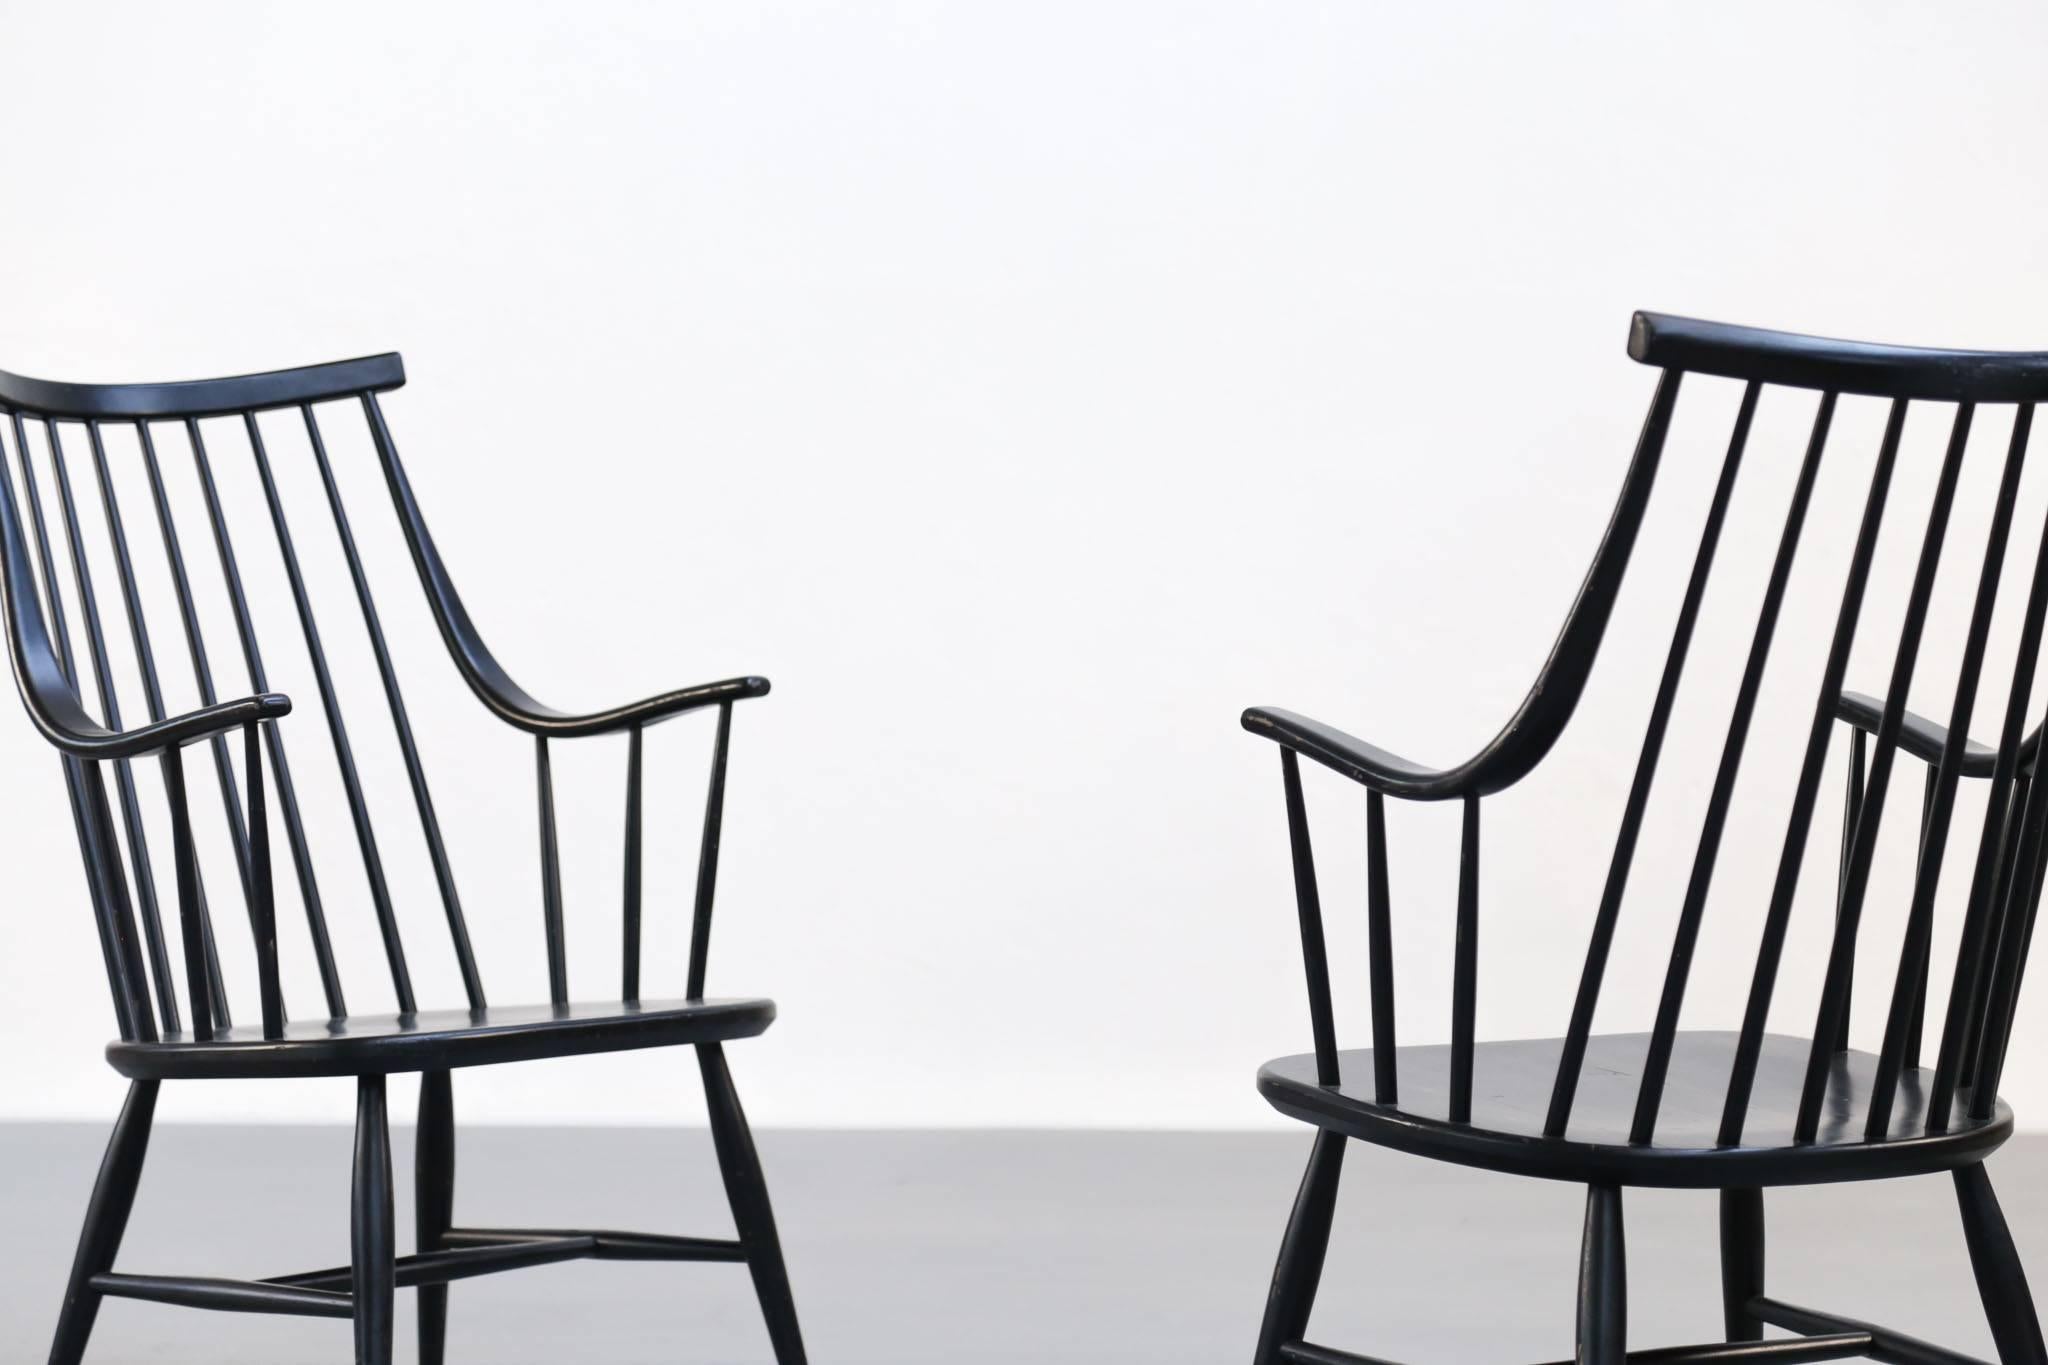 Set of two chairs designed by Lena Larsson, Swedish.
Made of wood, lacquered in black.